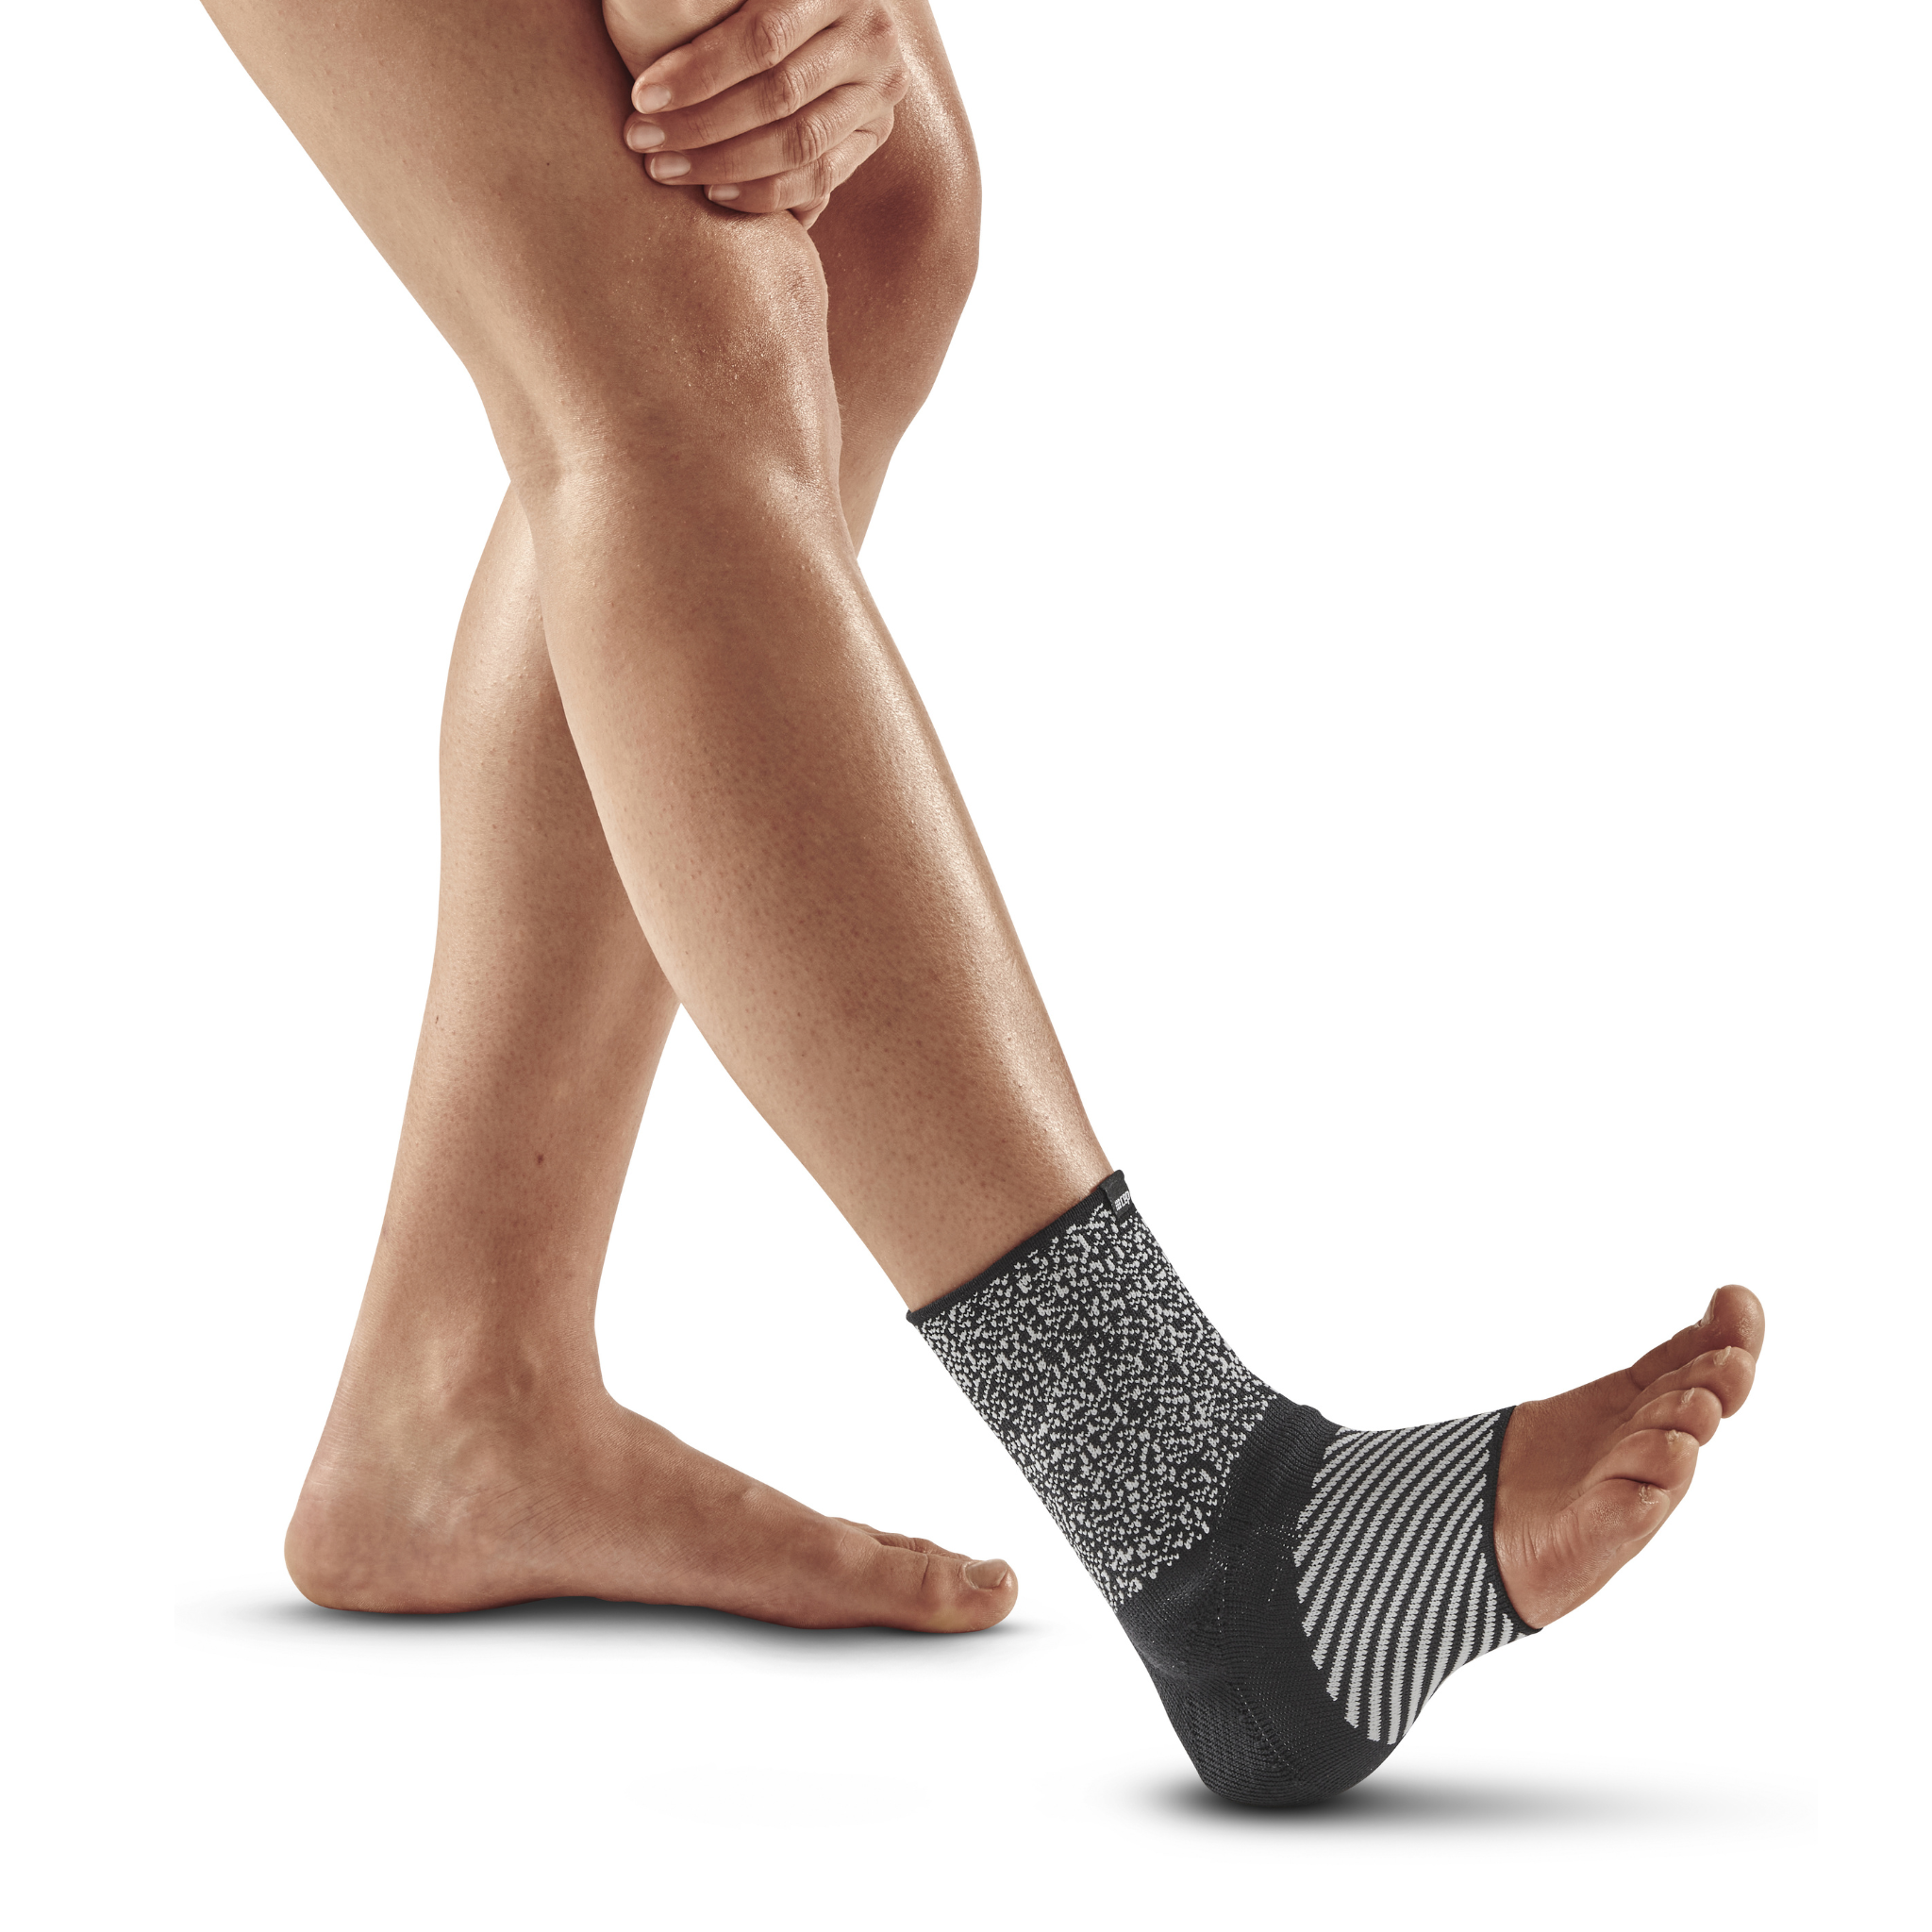 Silicone Elastic Ankle Support SUGGESTED HCPC: L1901 - Advanced Orthopaedics